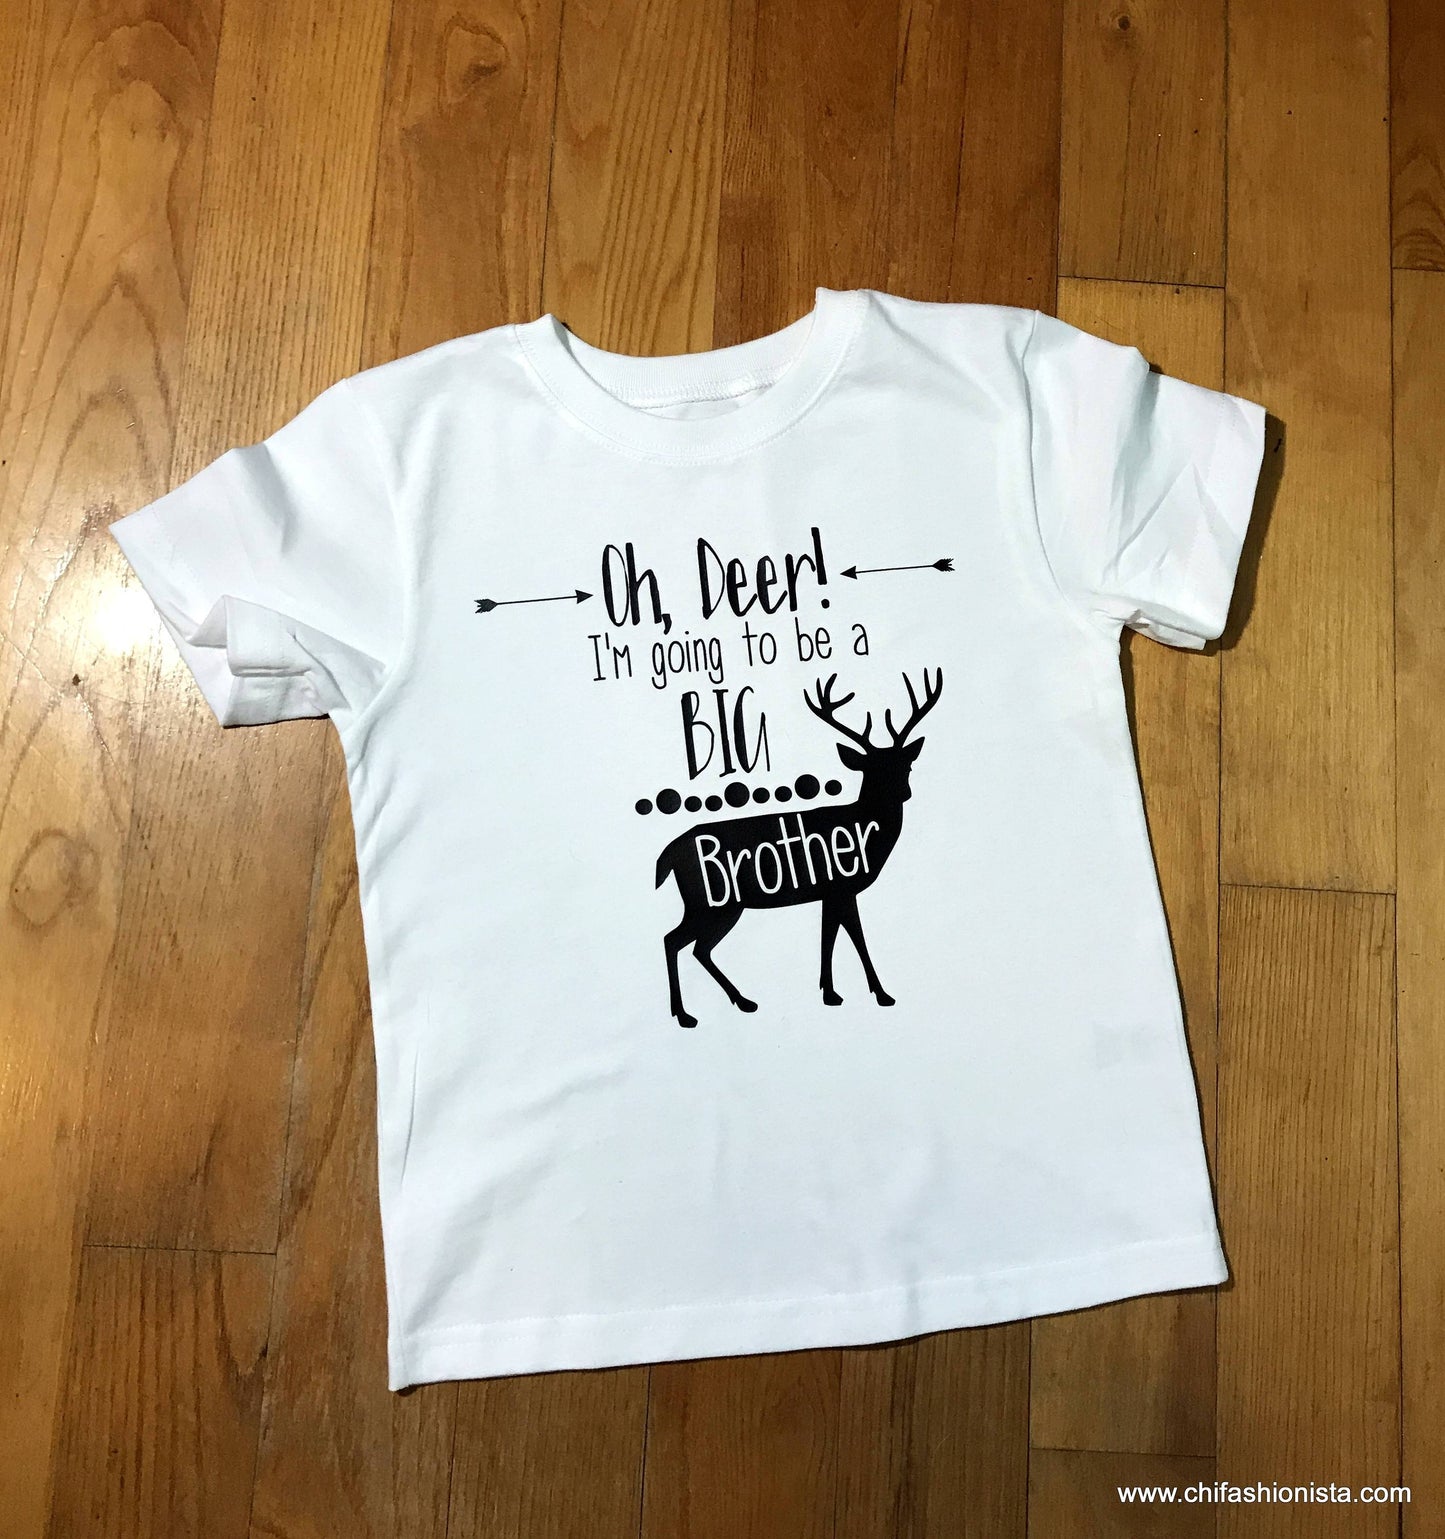 Handcrafted Children's Clothing, Clothing for Children and Parents, Oh Deer, I'm Going to Be a Big Brother- Pregnancy Announcement Shirt, chi-fashionista